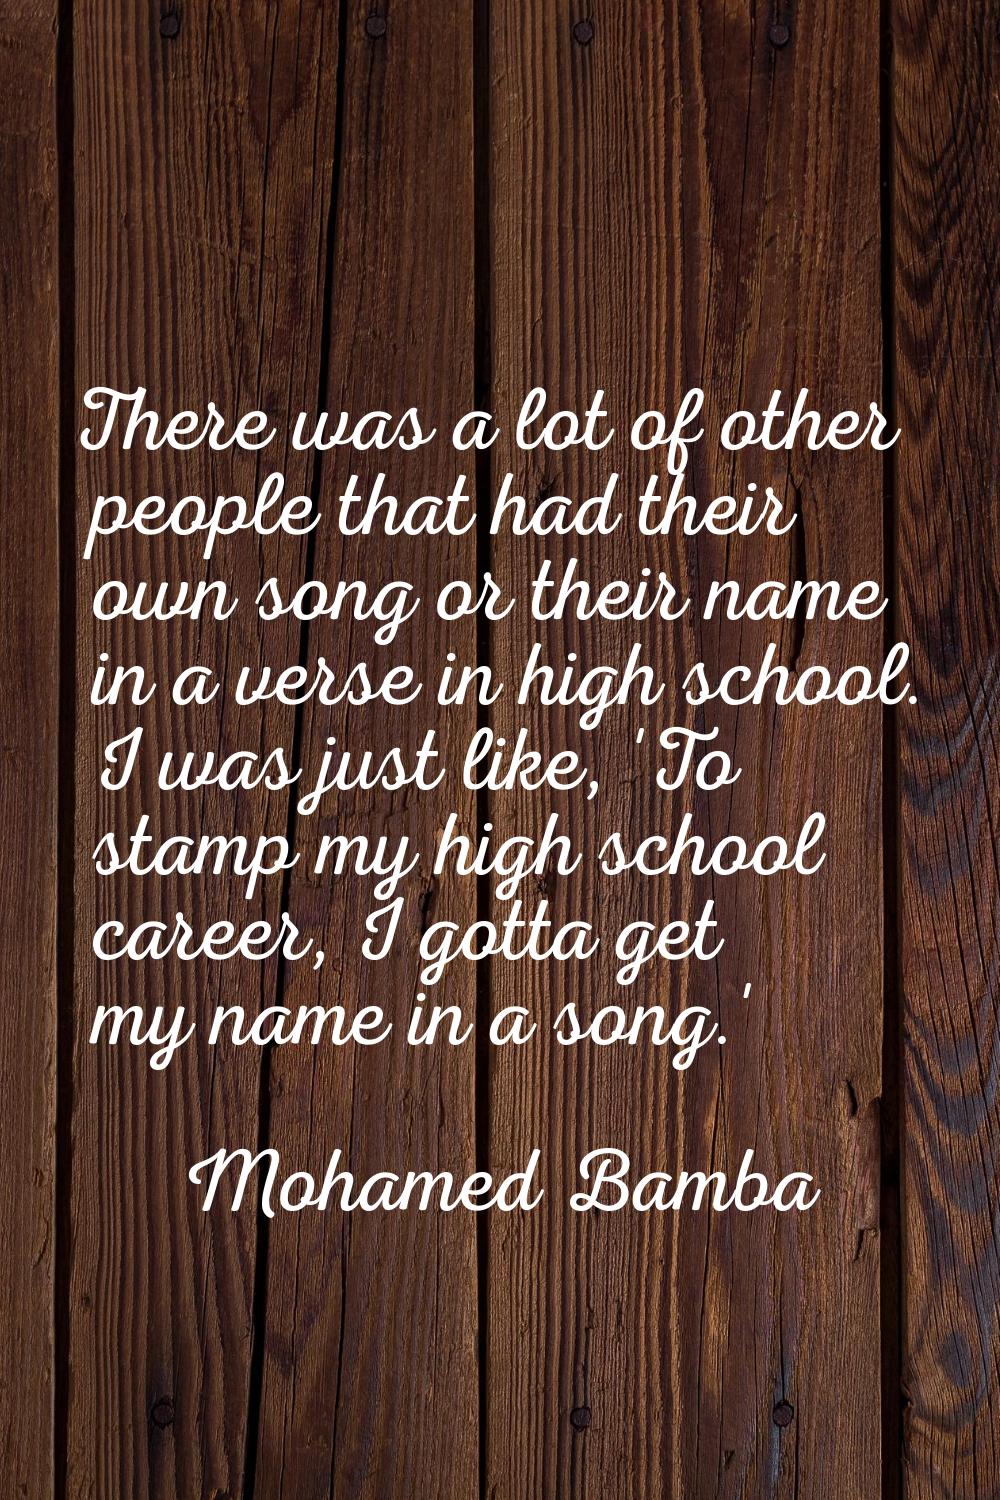 There was a lot of other people that had their own song or their name in a verse in high school. I 